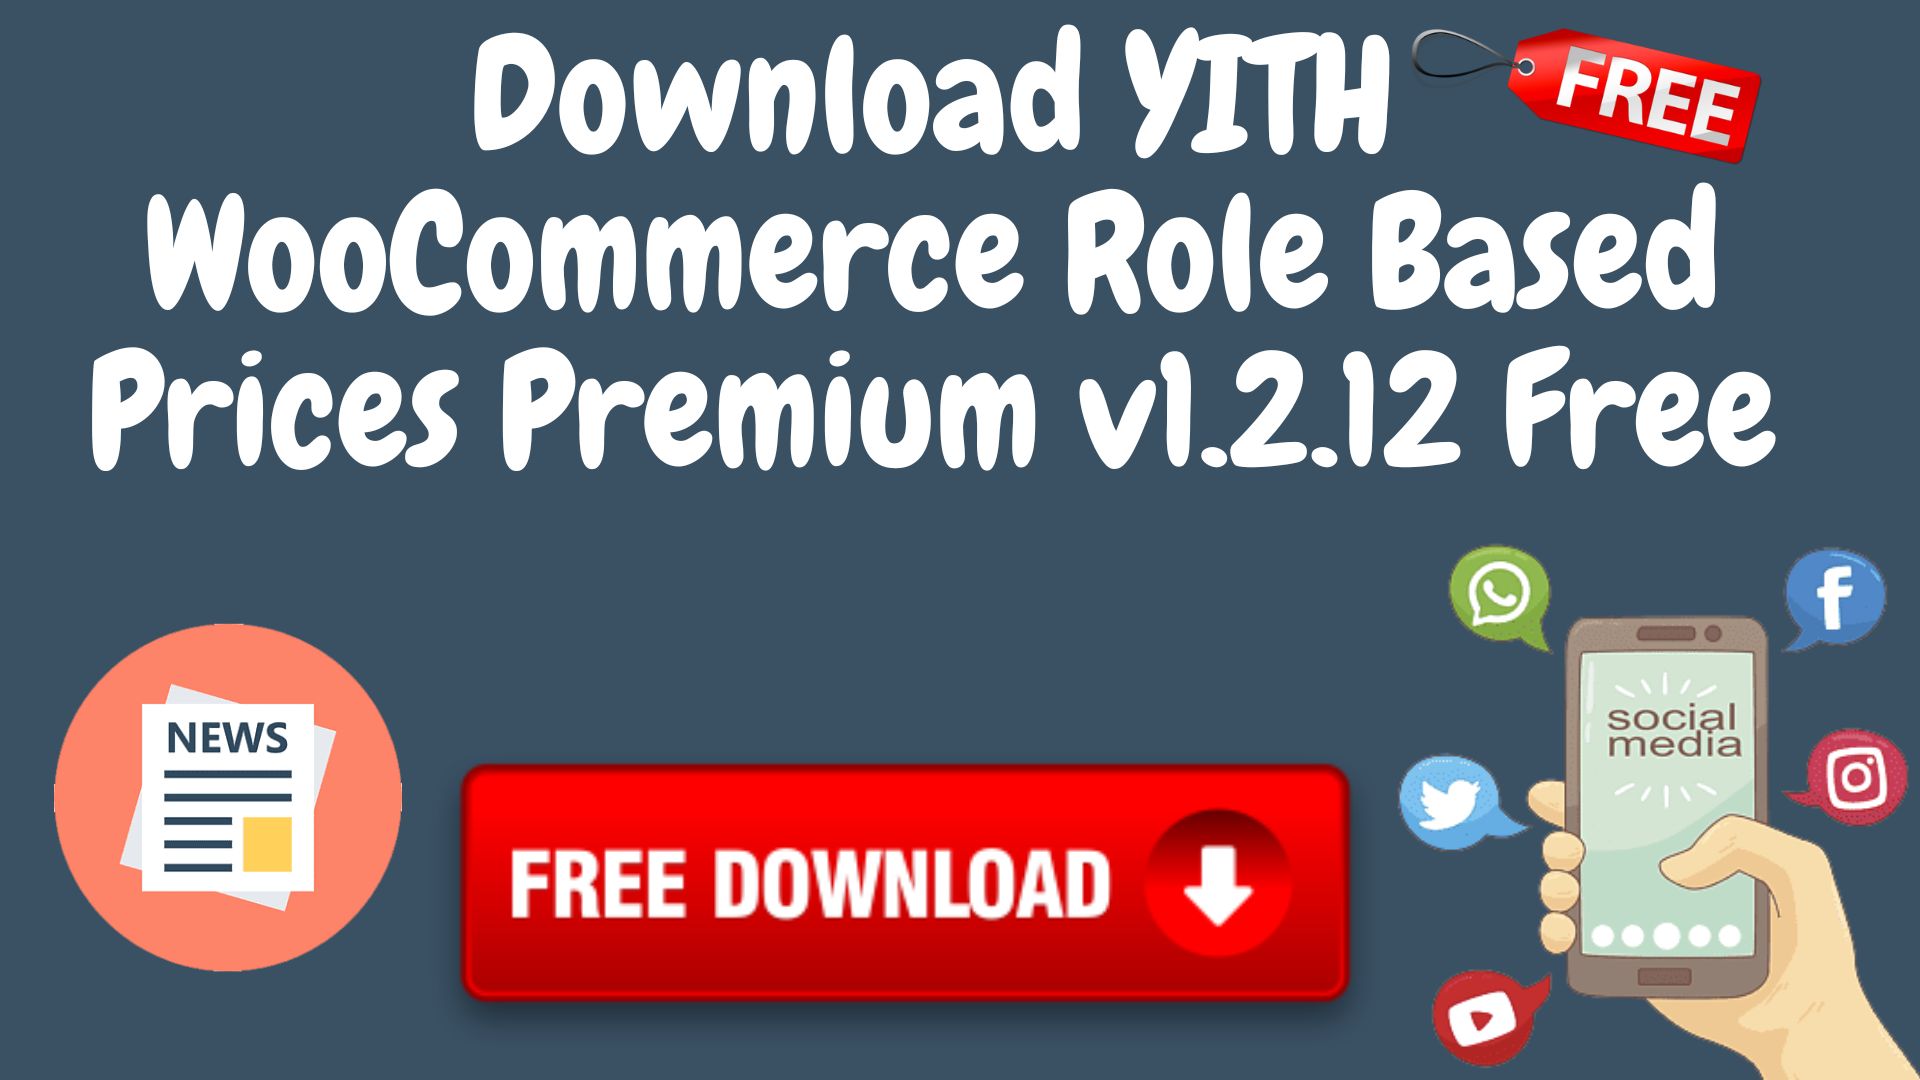 Download yith woocommerce role based prices premium v1. 2. 12 free